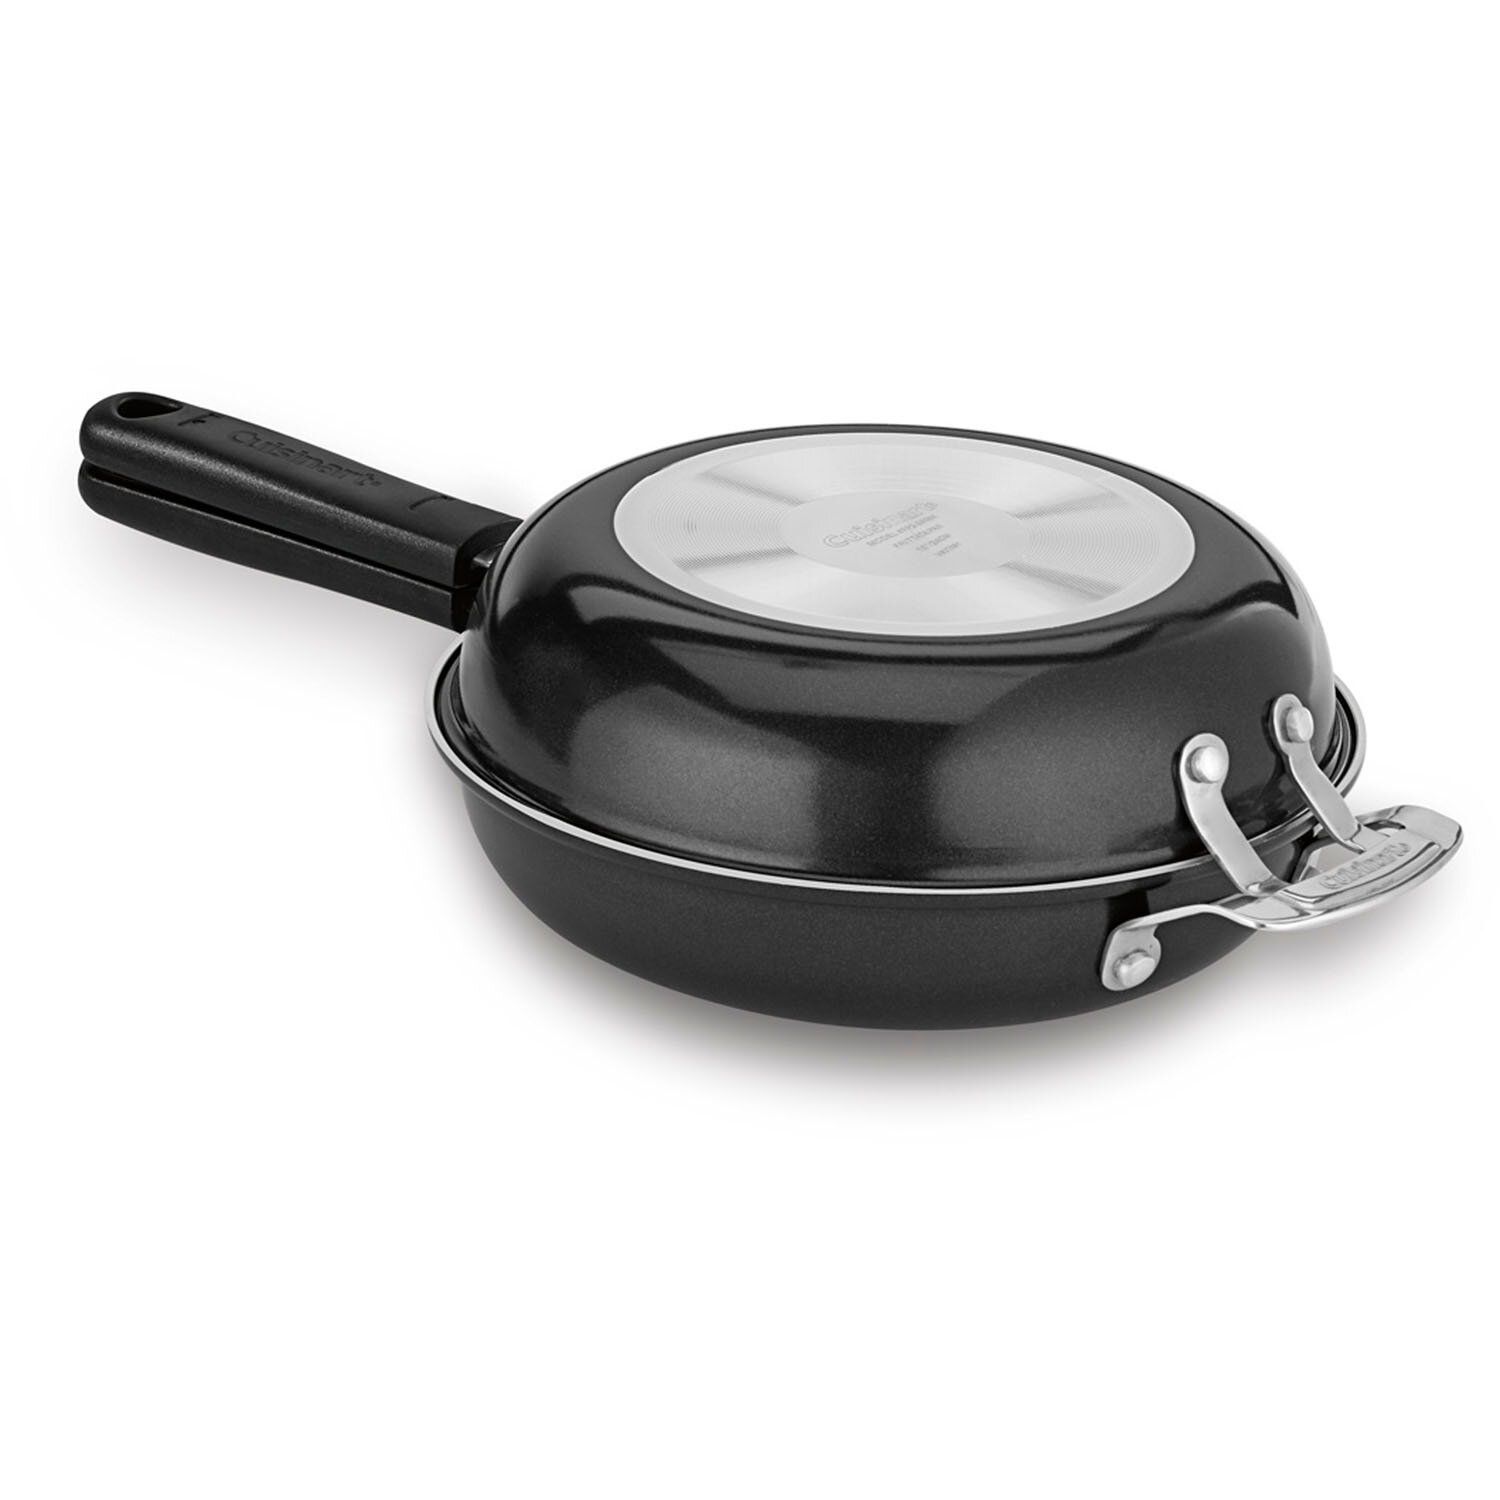 Cuisinart 2-Pack Cast Iron Non-Stick Griddle and Pan Set in the Grill  Cookware department at